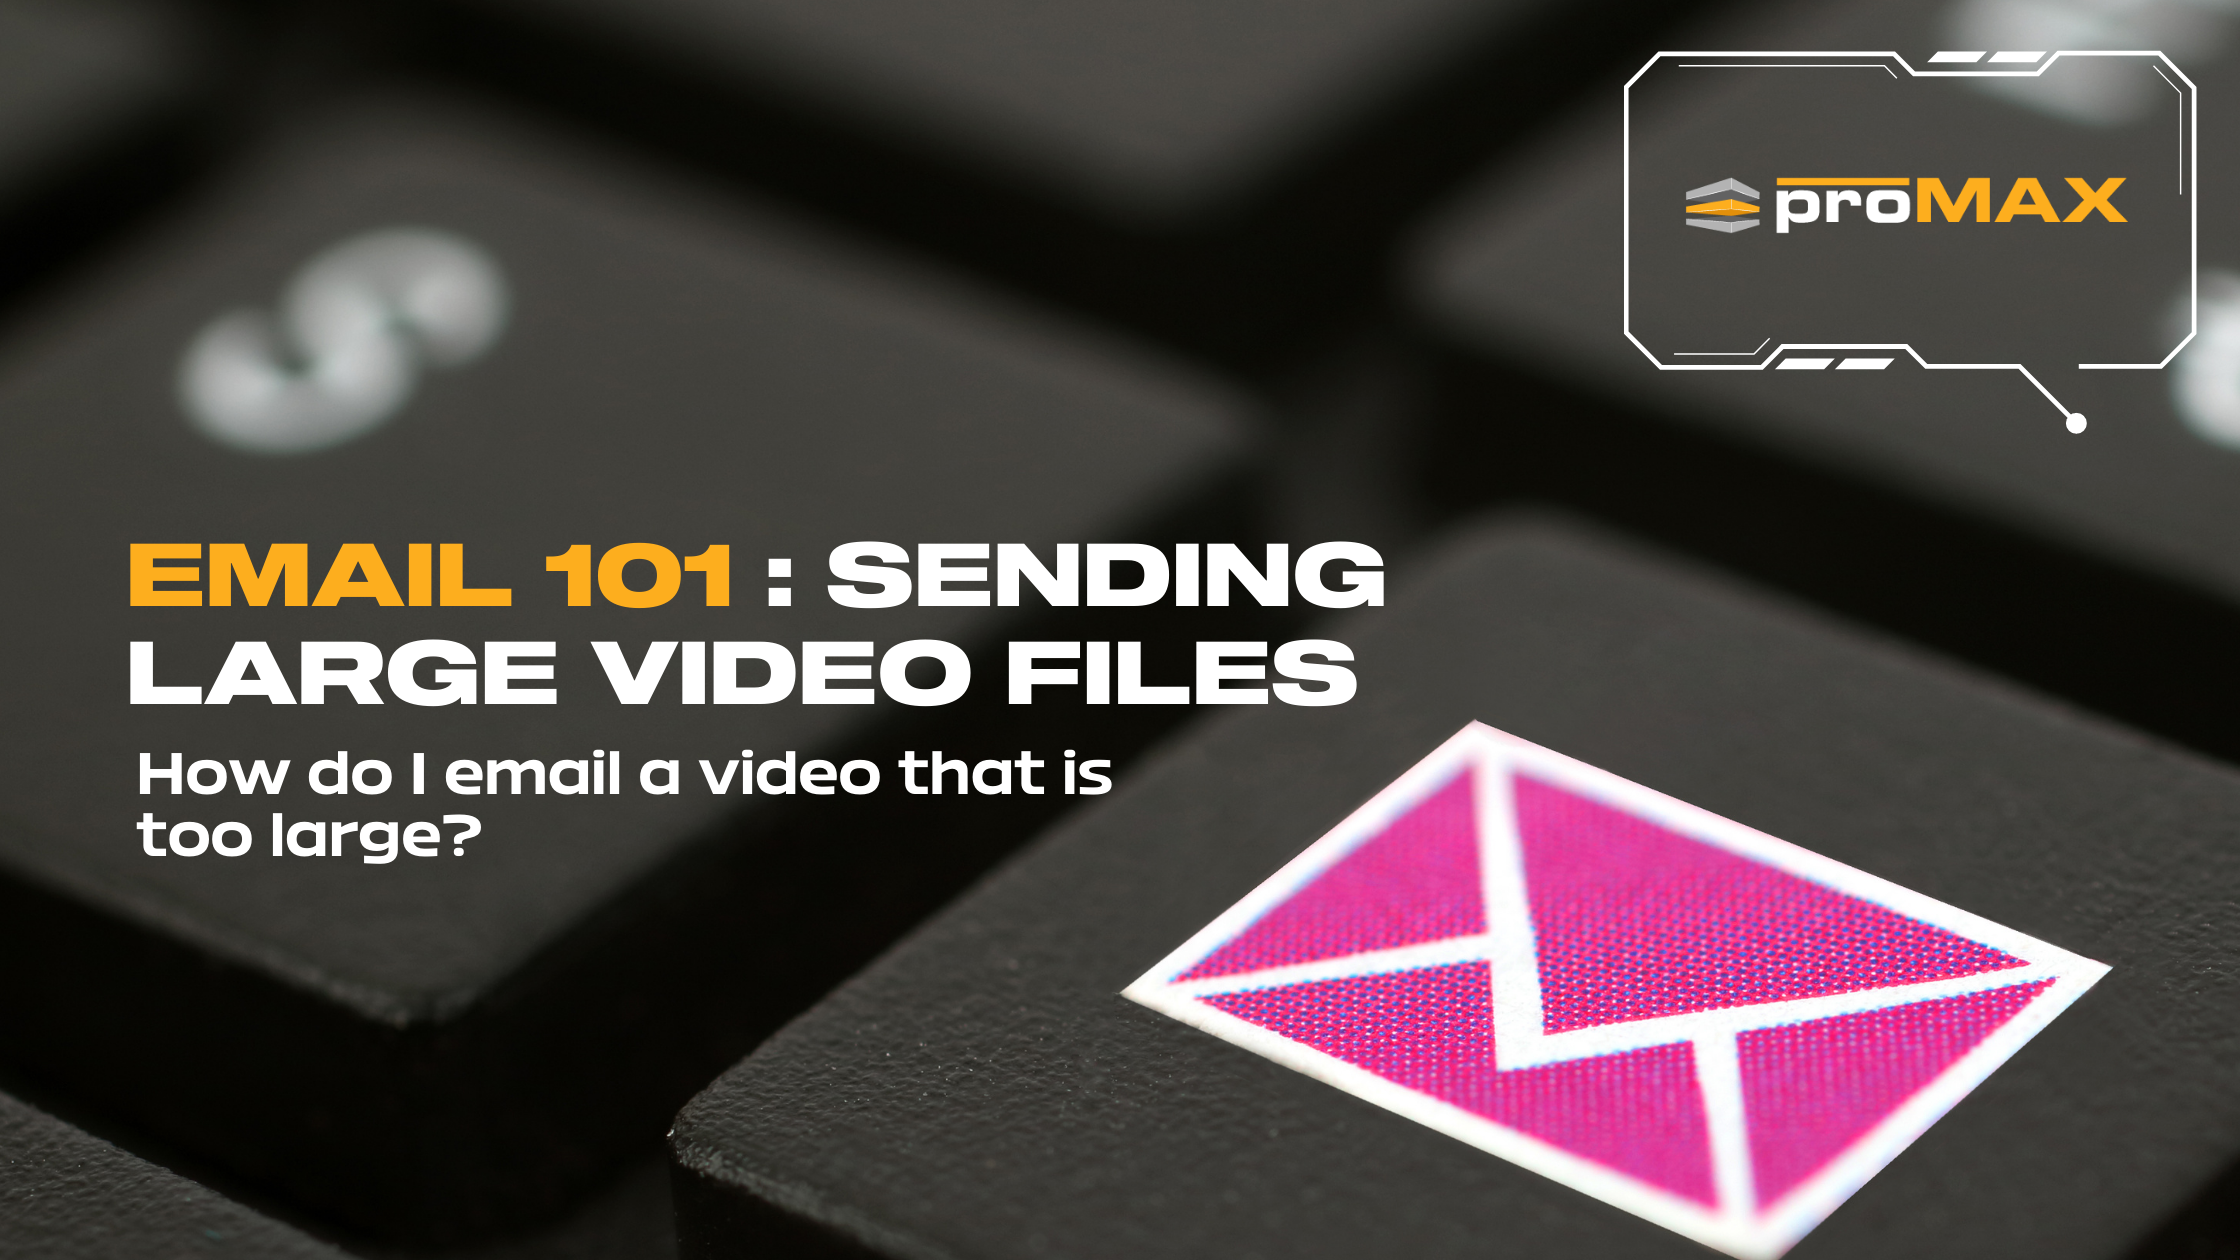 Email 101: Sending Large Video Files